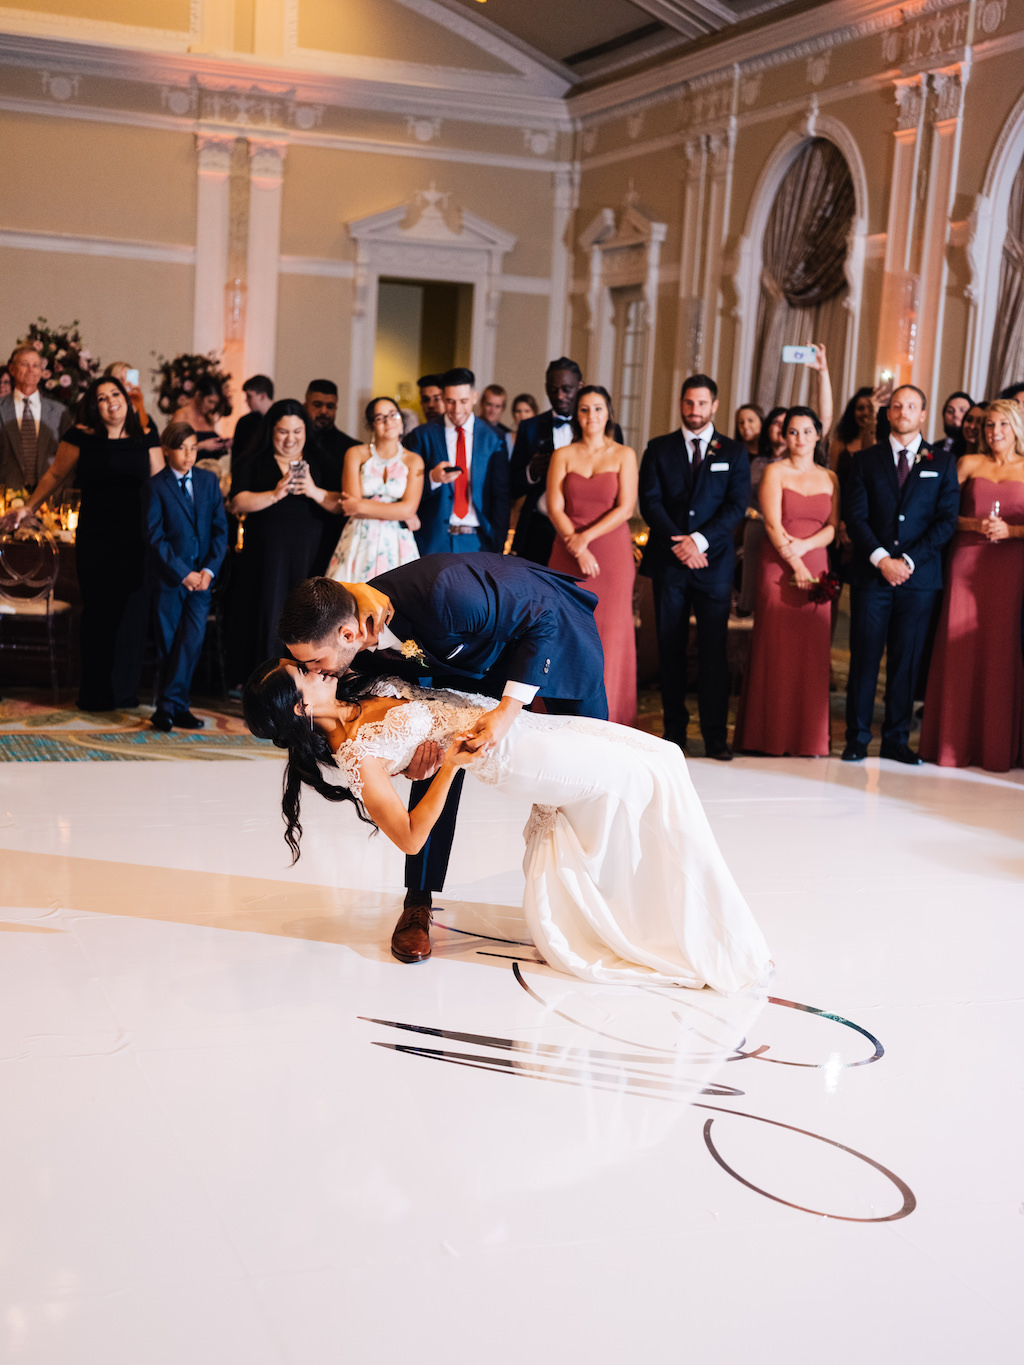 Bride and Groom Kevin Keirmair, Professional Tampa Bay Rays Baseball Player, Wedding Reception Ballroom First Dance Portrait, White Dance Floor with Silver Monogram | St. Petersburg Hotel Wedding Venue The Vinoy Renaissance | Tampa Bay Wedding Planner Parties A'la Carte